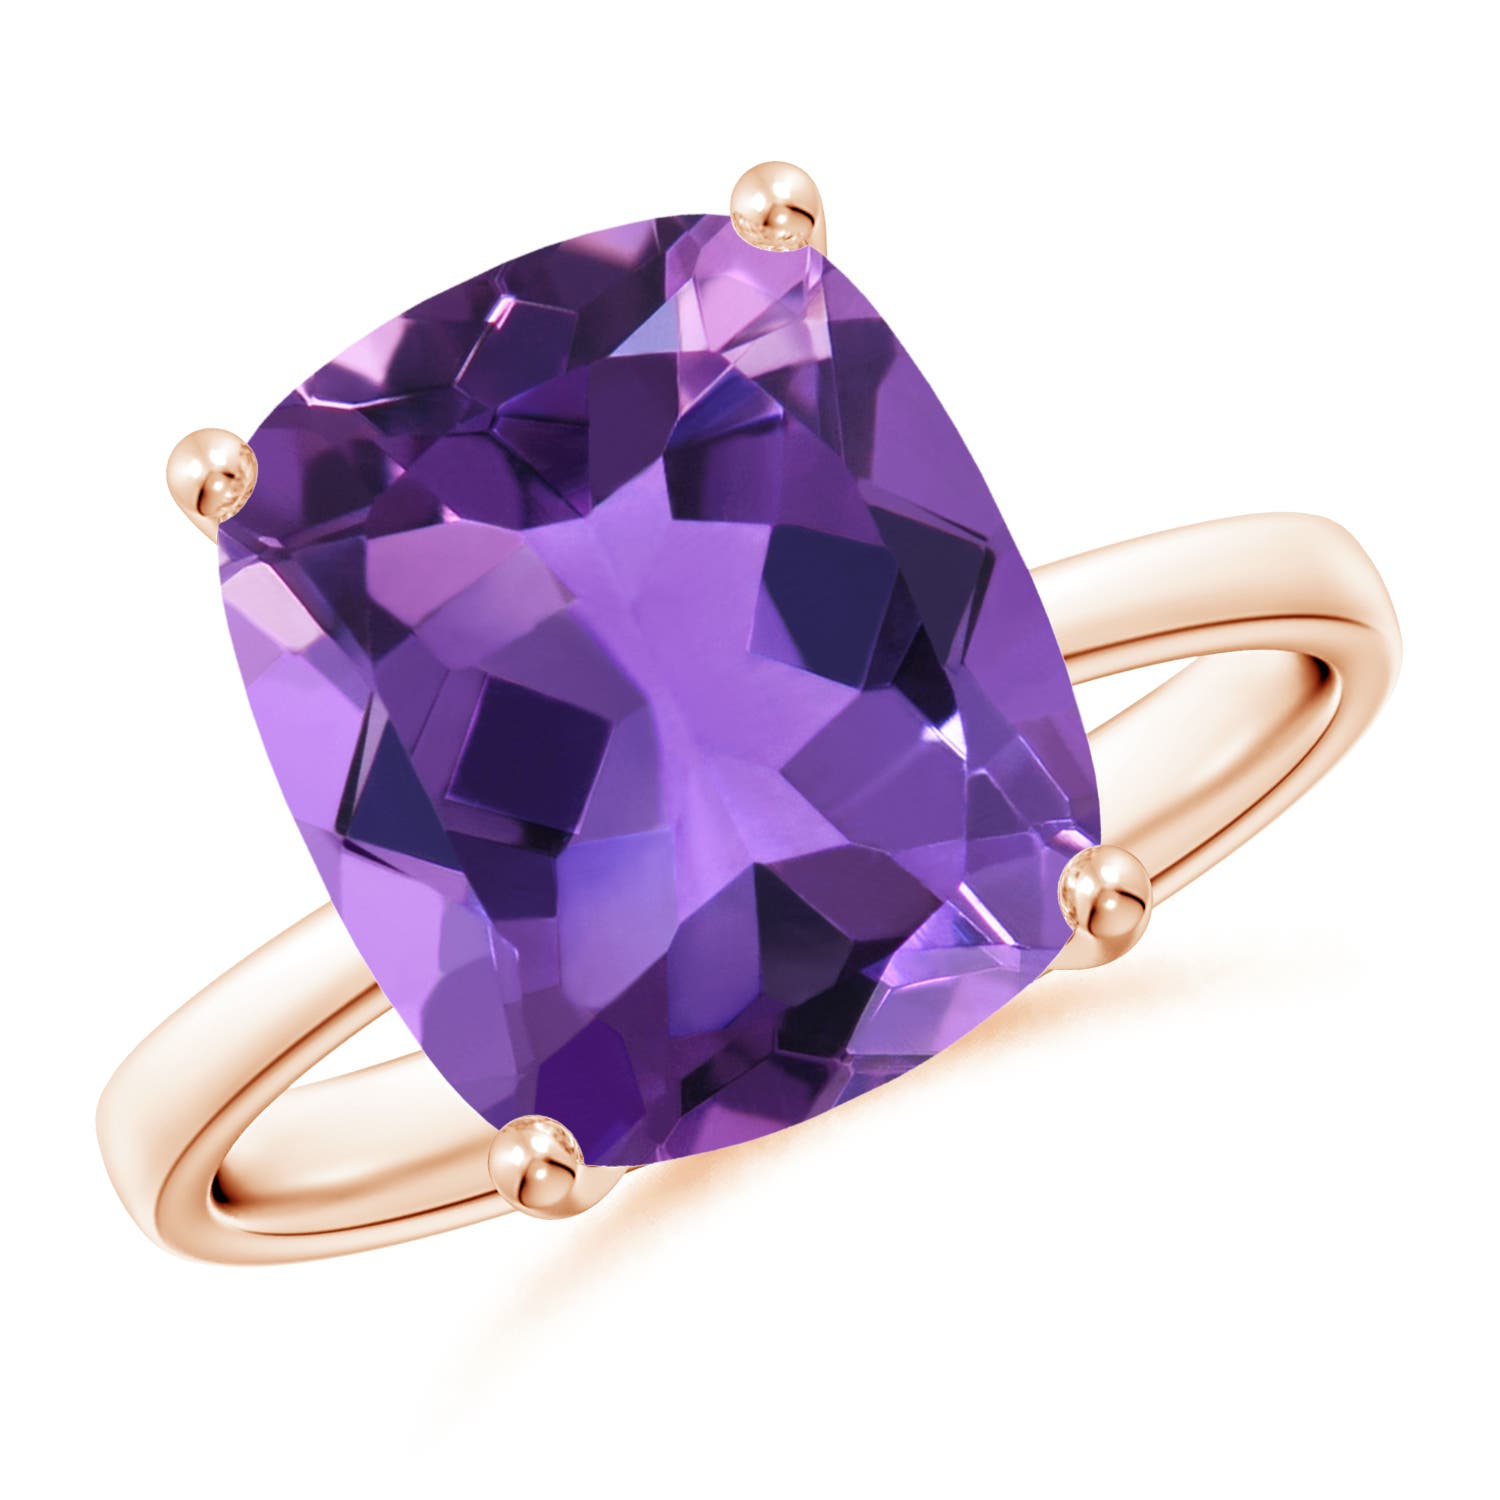 AAA - Amethyst / 4.6 CT / 14 KT Rose Gold